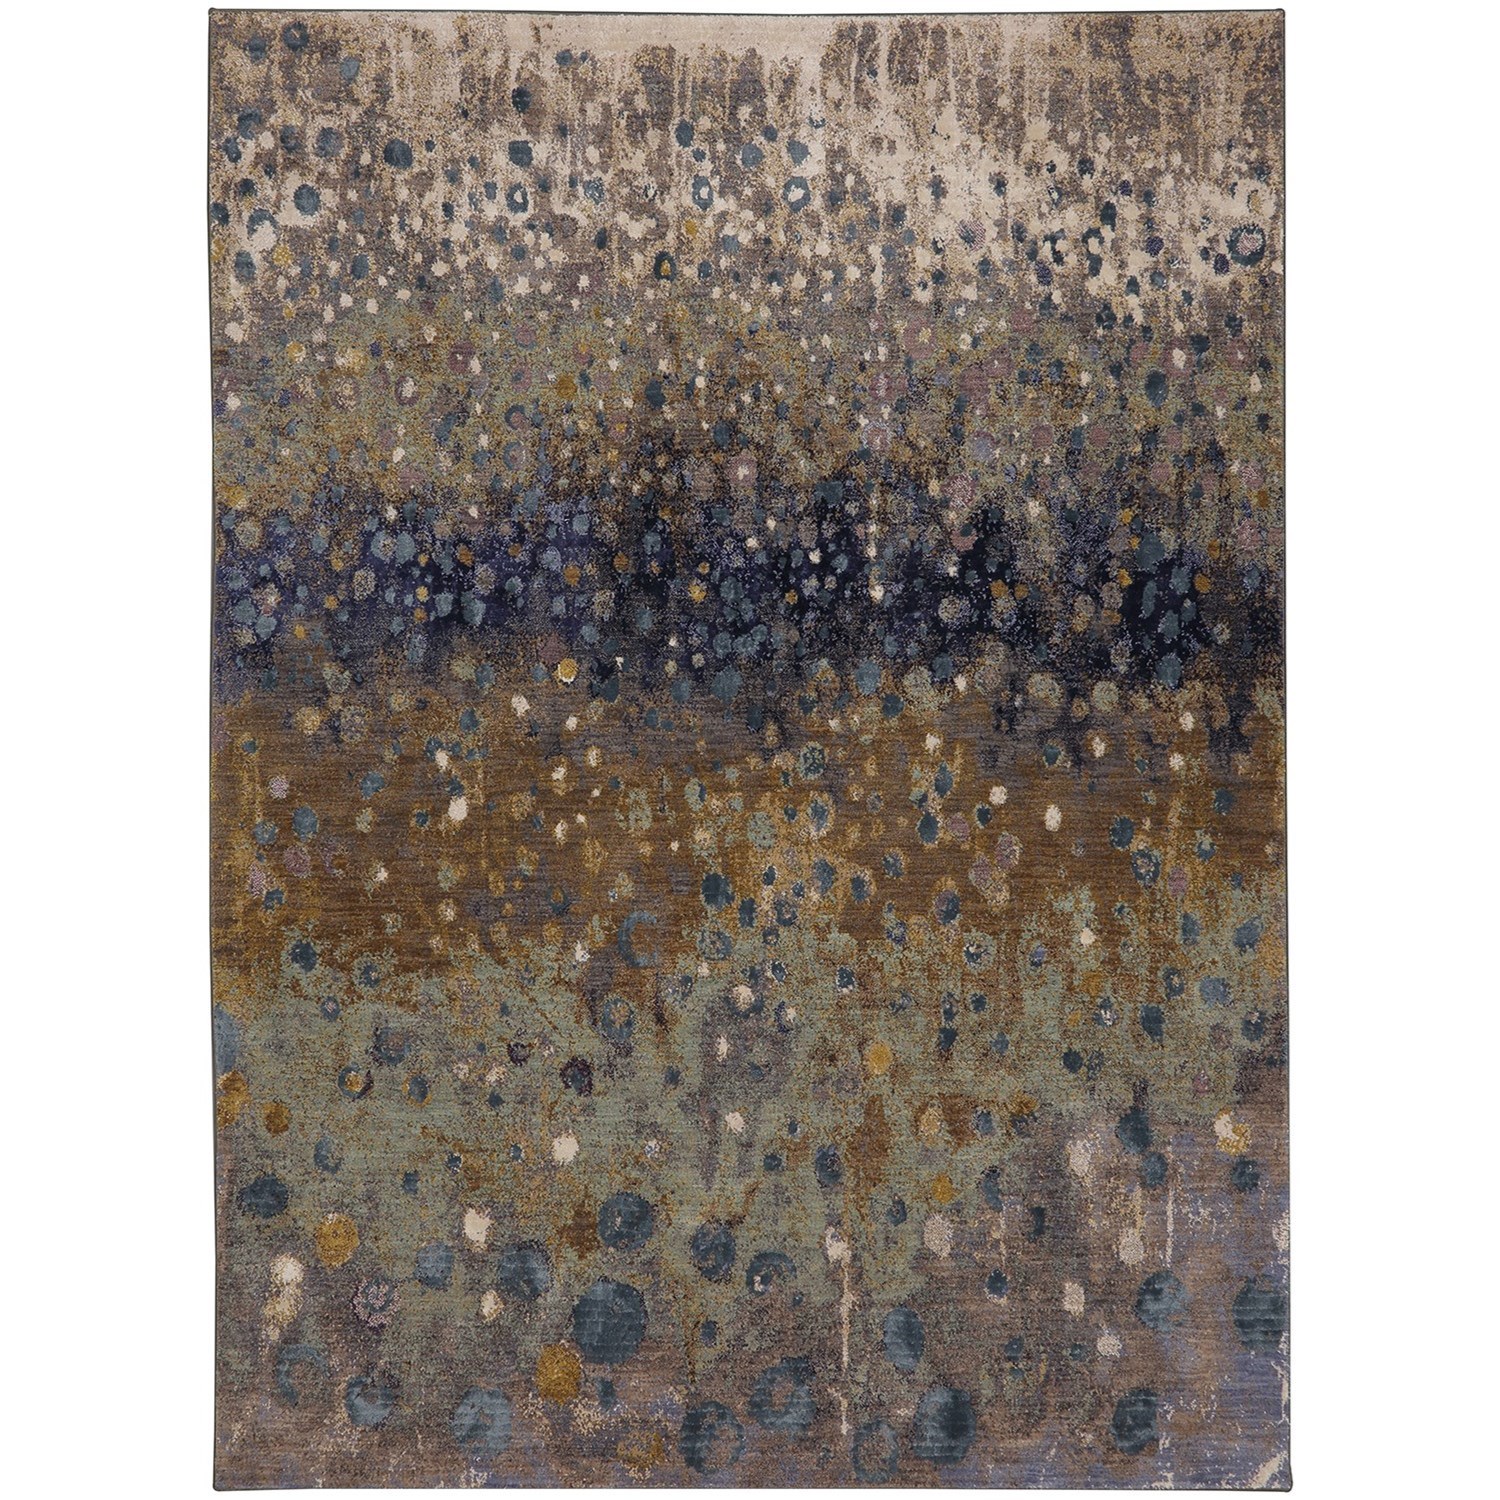 9' 6"x12' 11" Rectangle Abstract Area Rug